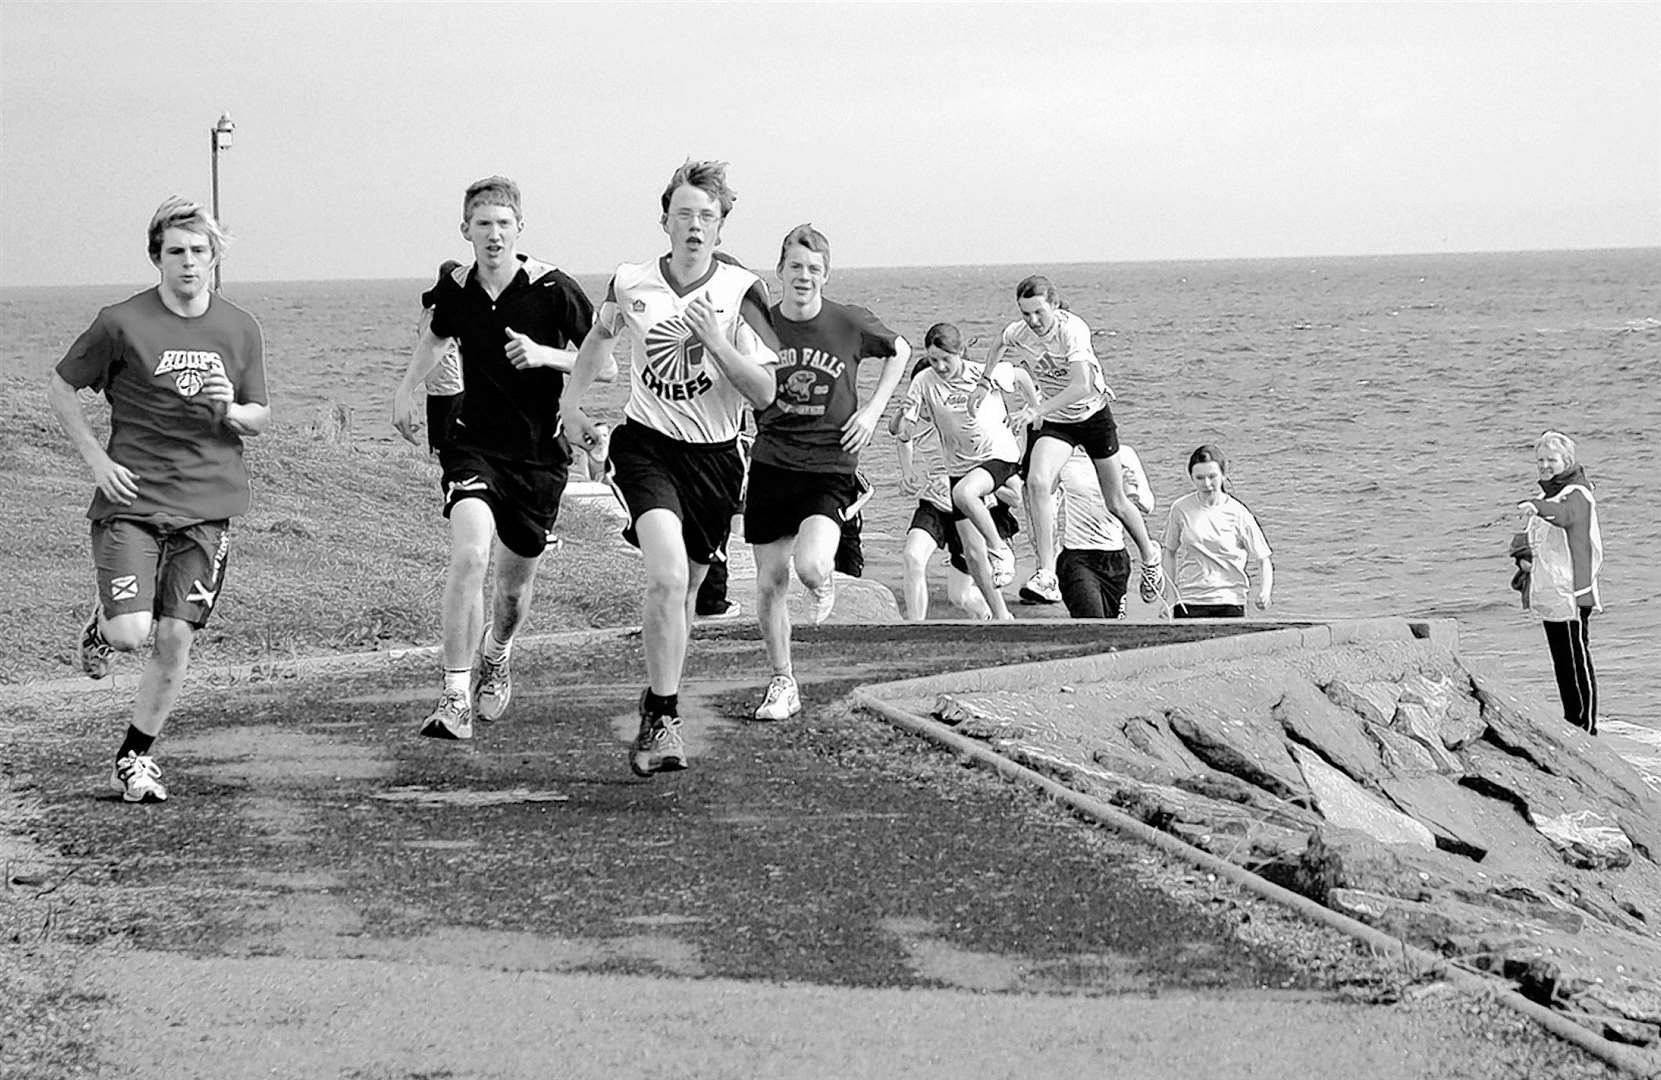 Setting the pace in the Pentland Mile race in Thurso in 2007 are (from left) Craig Spargo, Graeme Taylor, David Mitchell and Alistair Black.